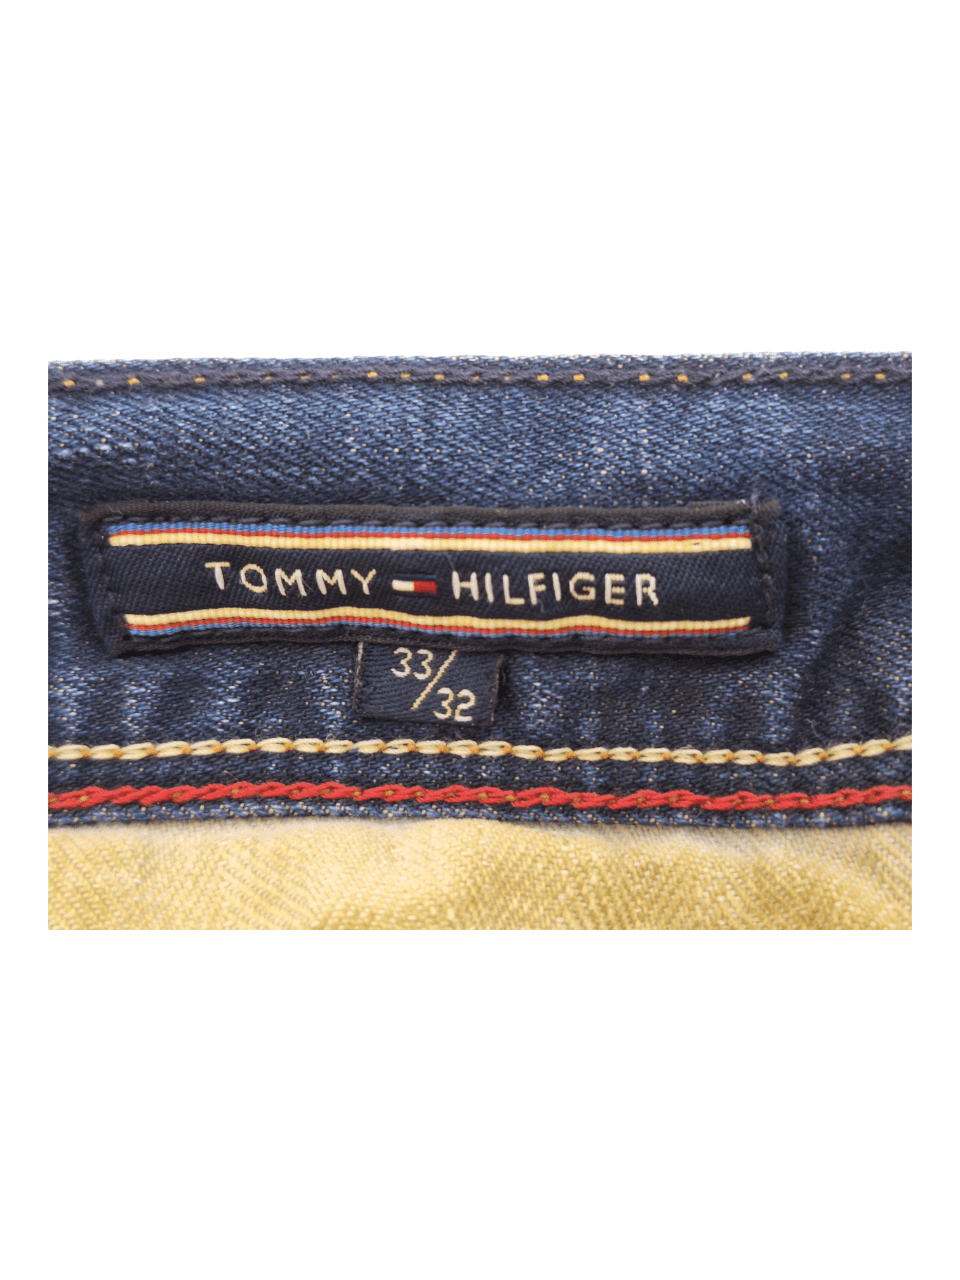 Jeans TOMMY HIFILGER Brut taille 32/33 